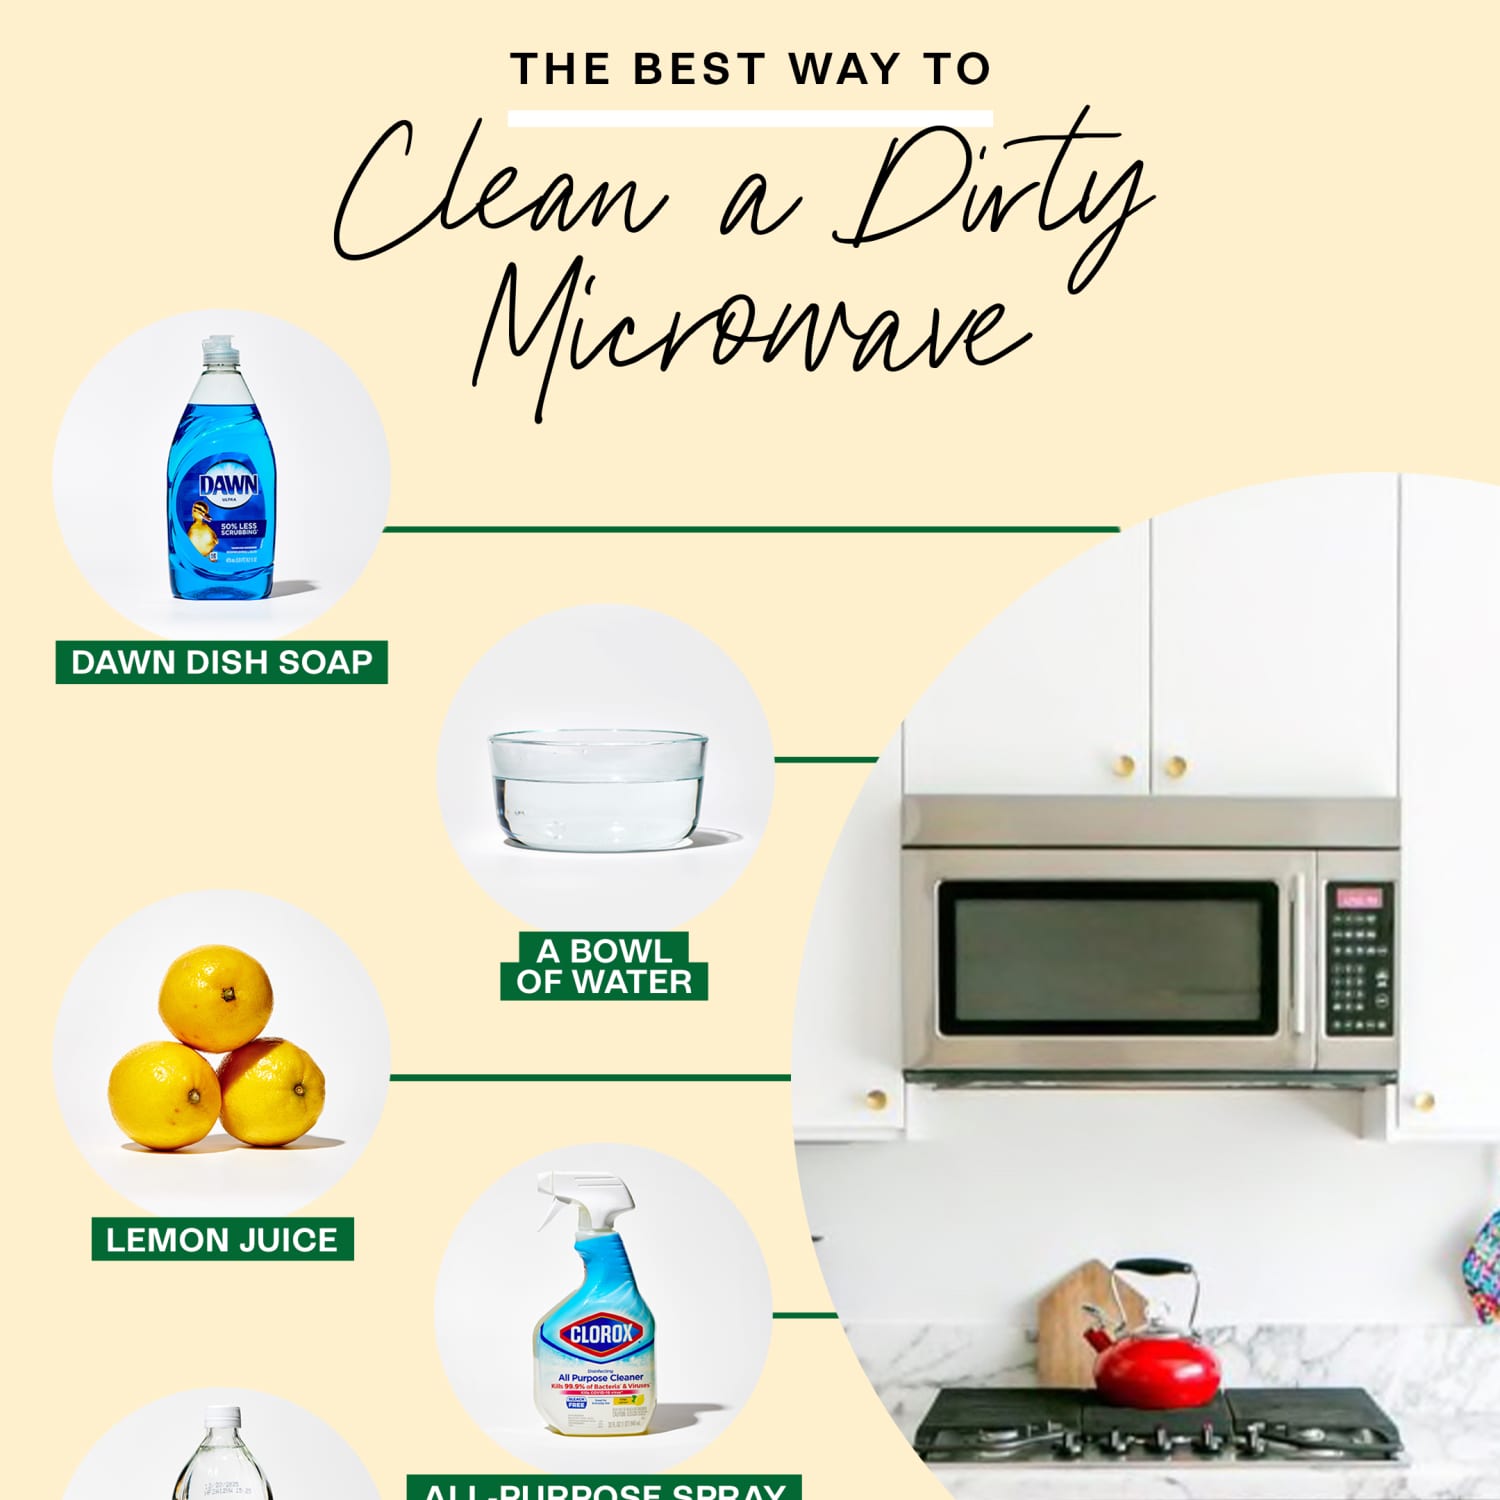 How To Clean A Filthy Microwave